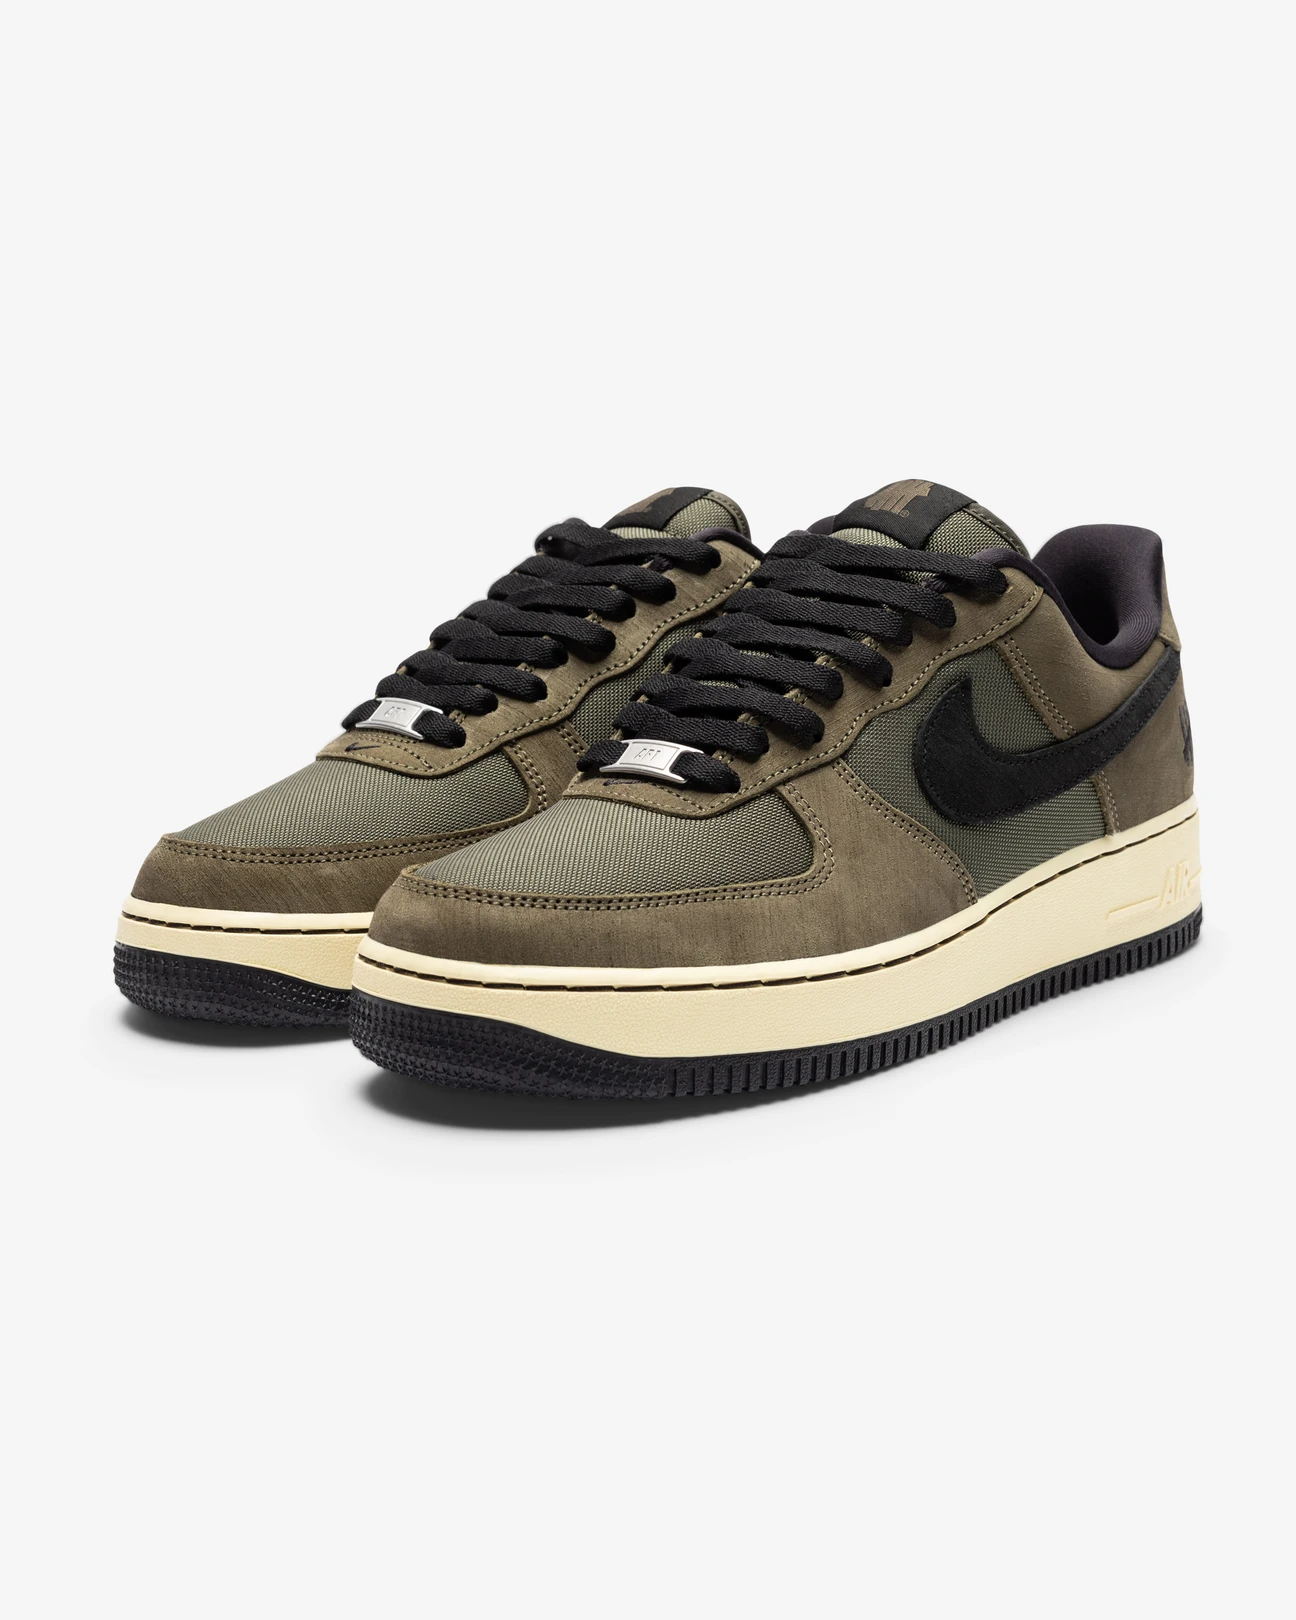 Now Available: Undefeated x Nike Air Force 1 Low 